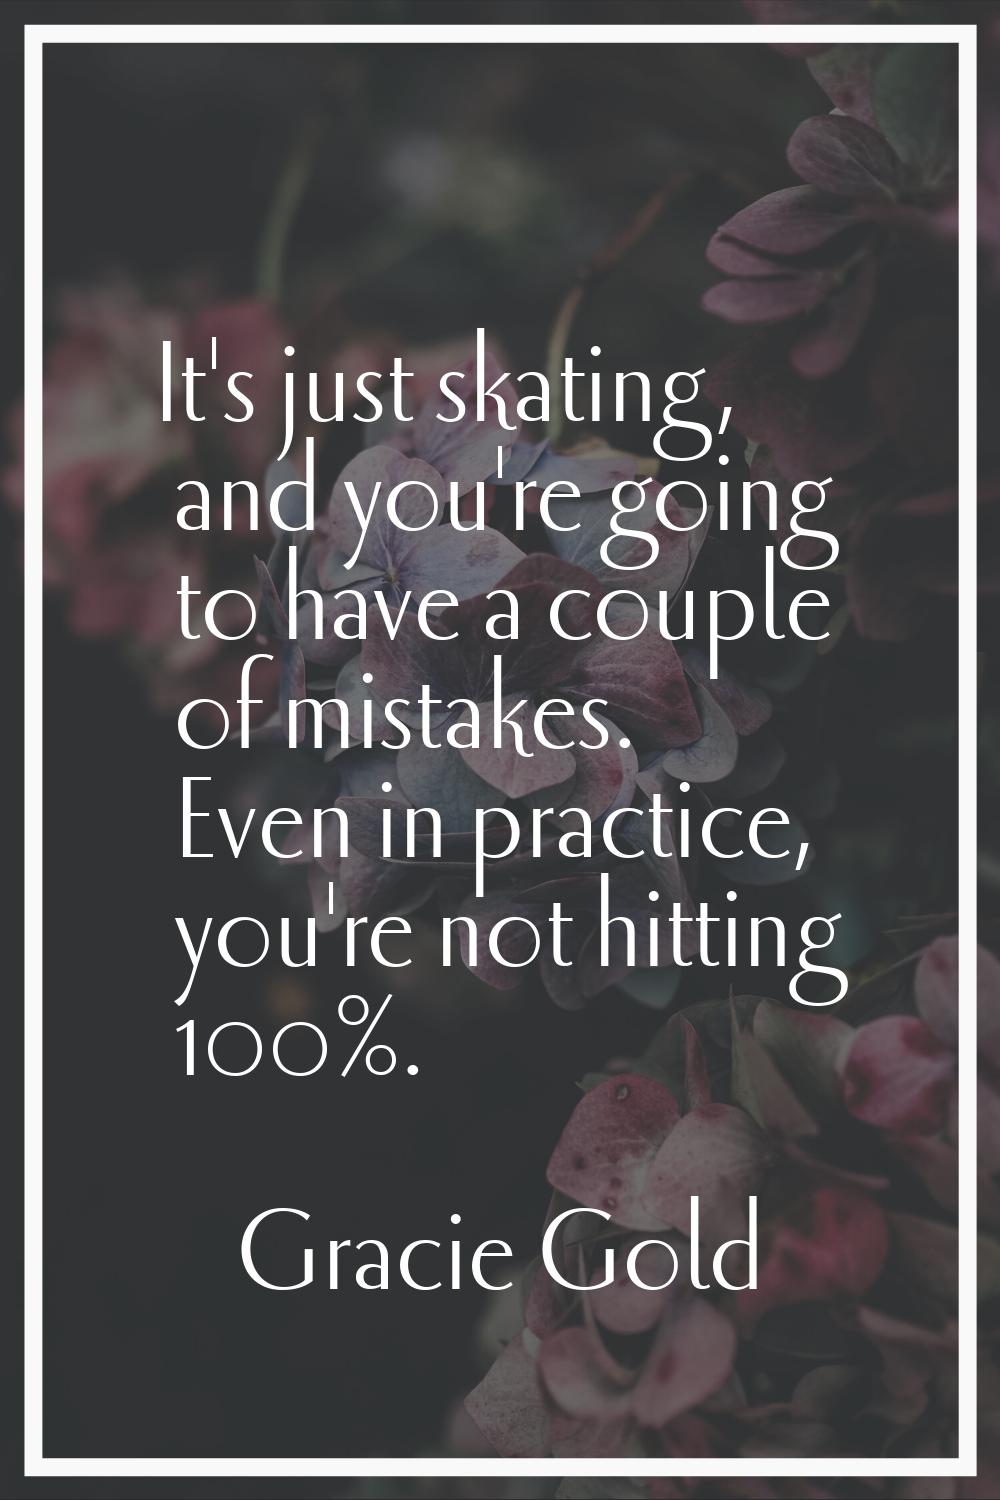 It's just skating, and you're going to have a couple of mistakes. Even in practice, you're not hitt